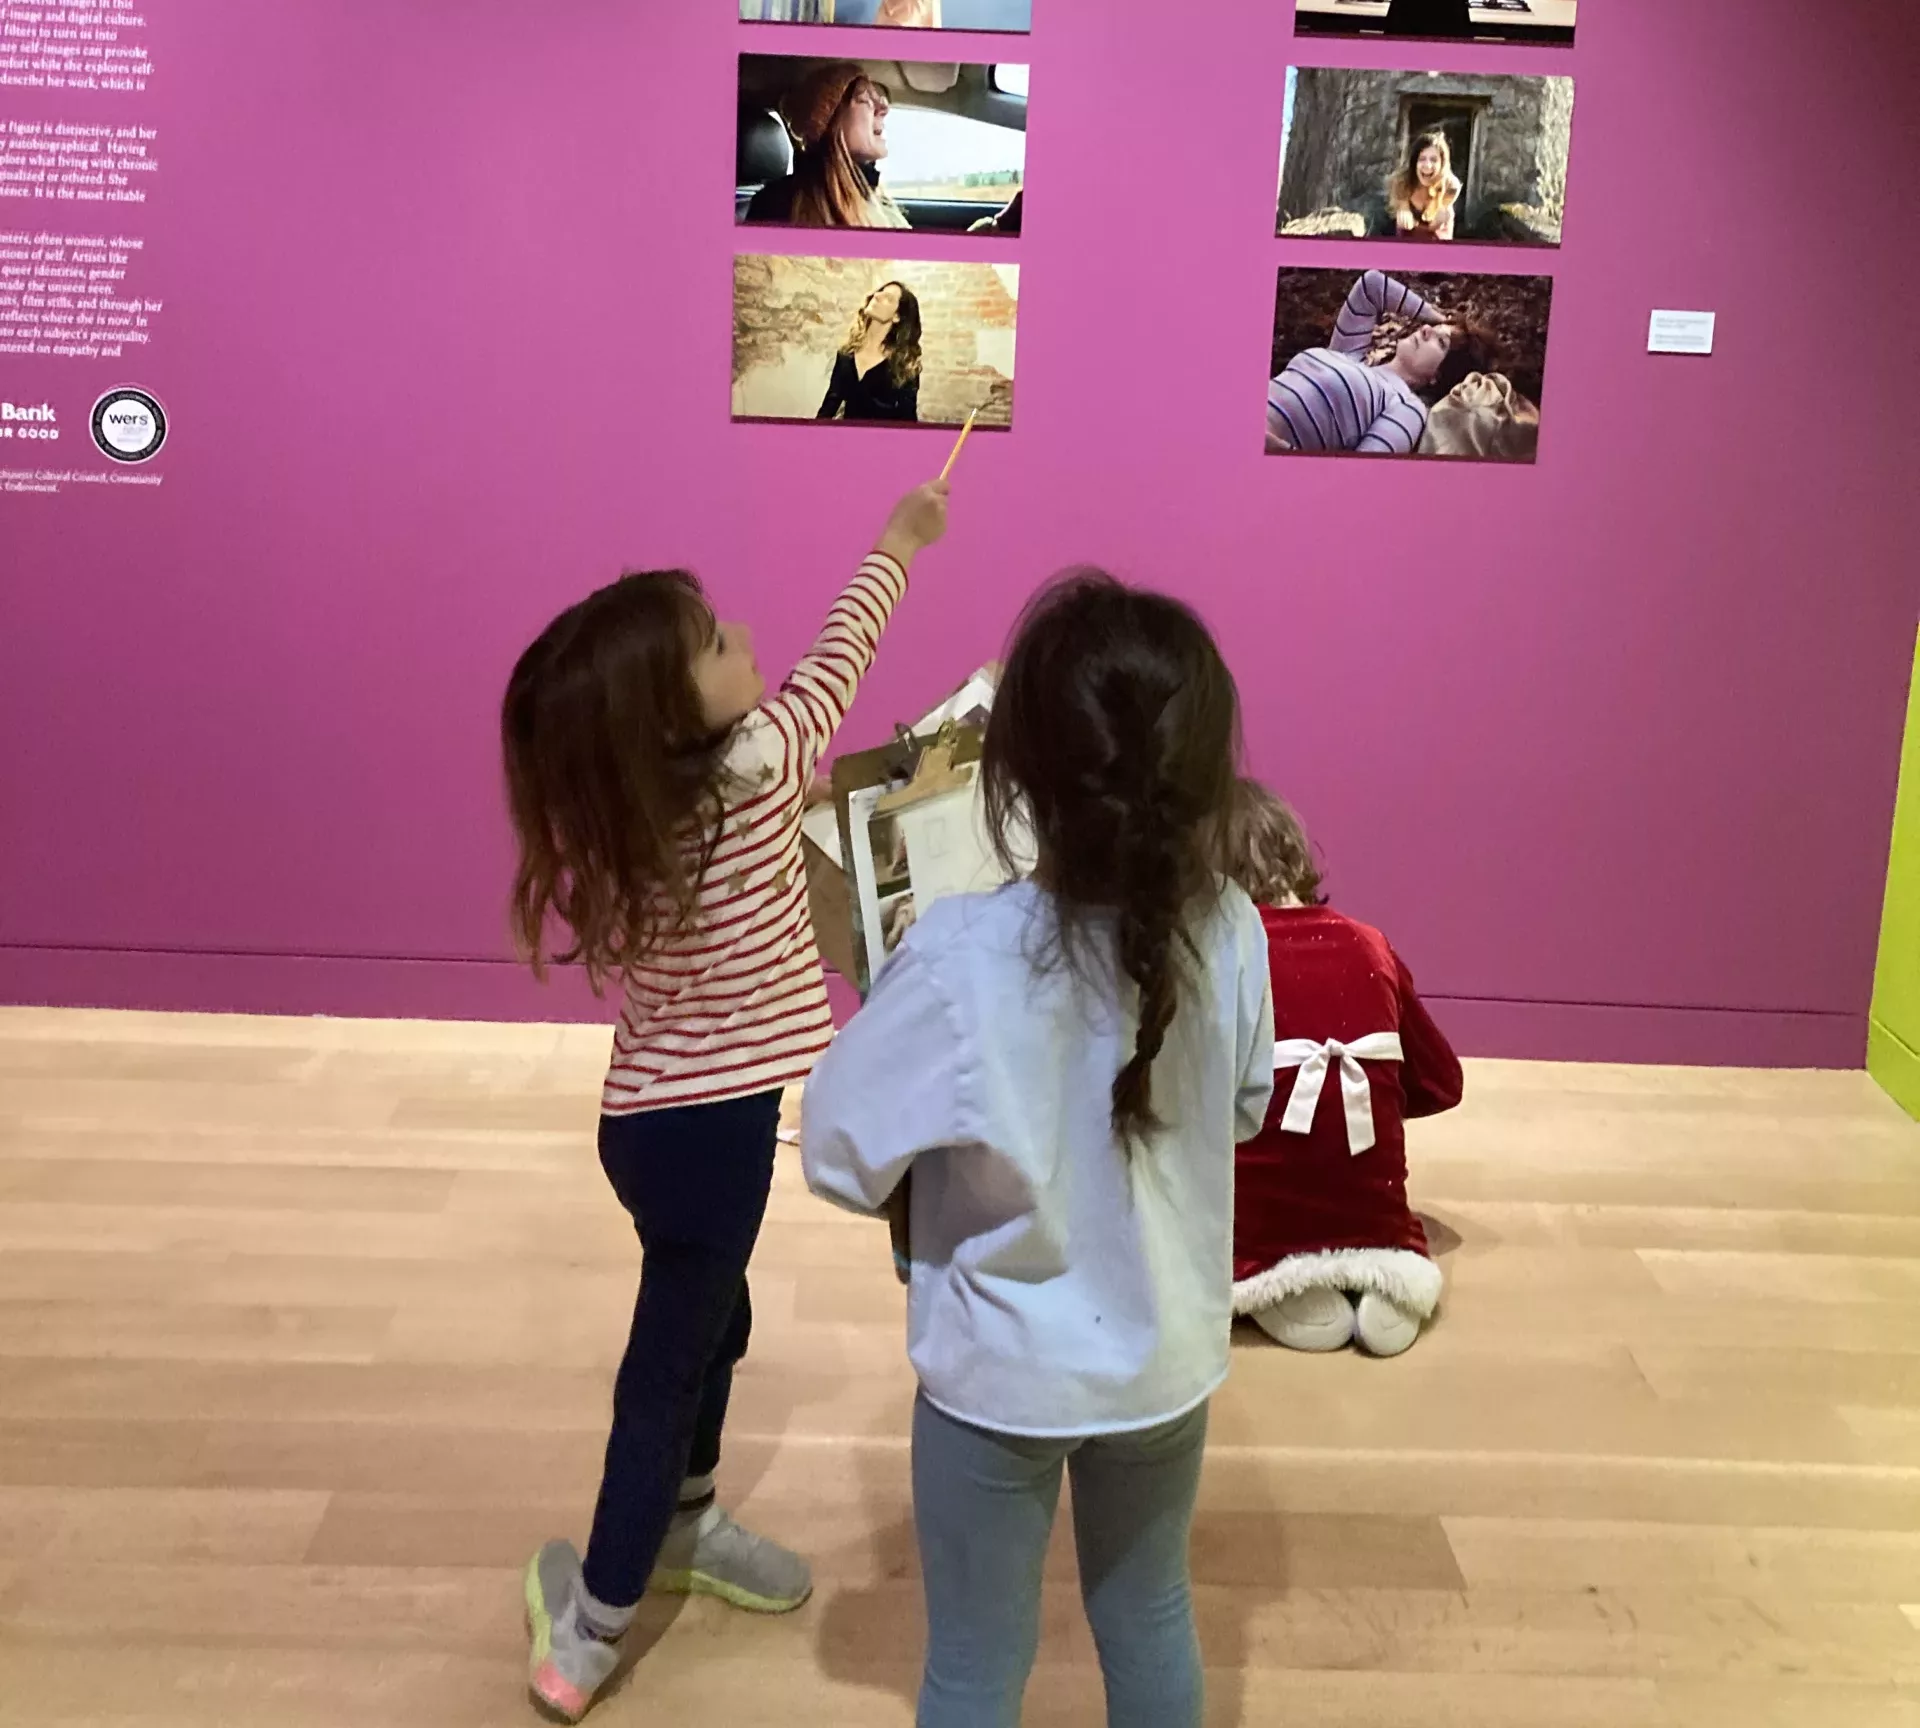 Photograph of three children with clip boards in a gallery looking at photographs.